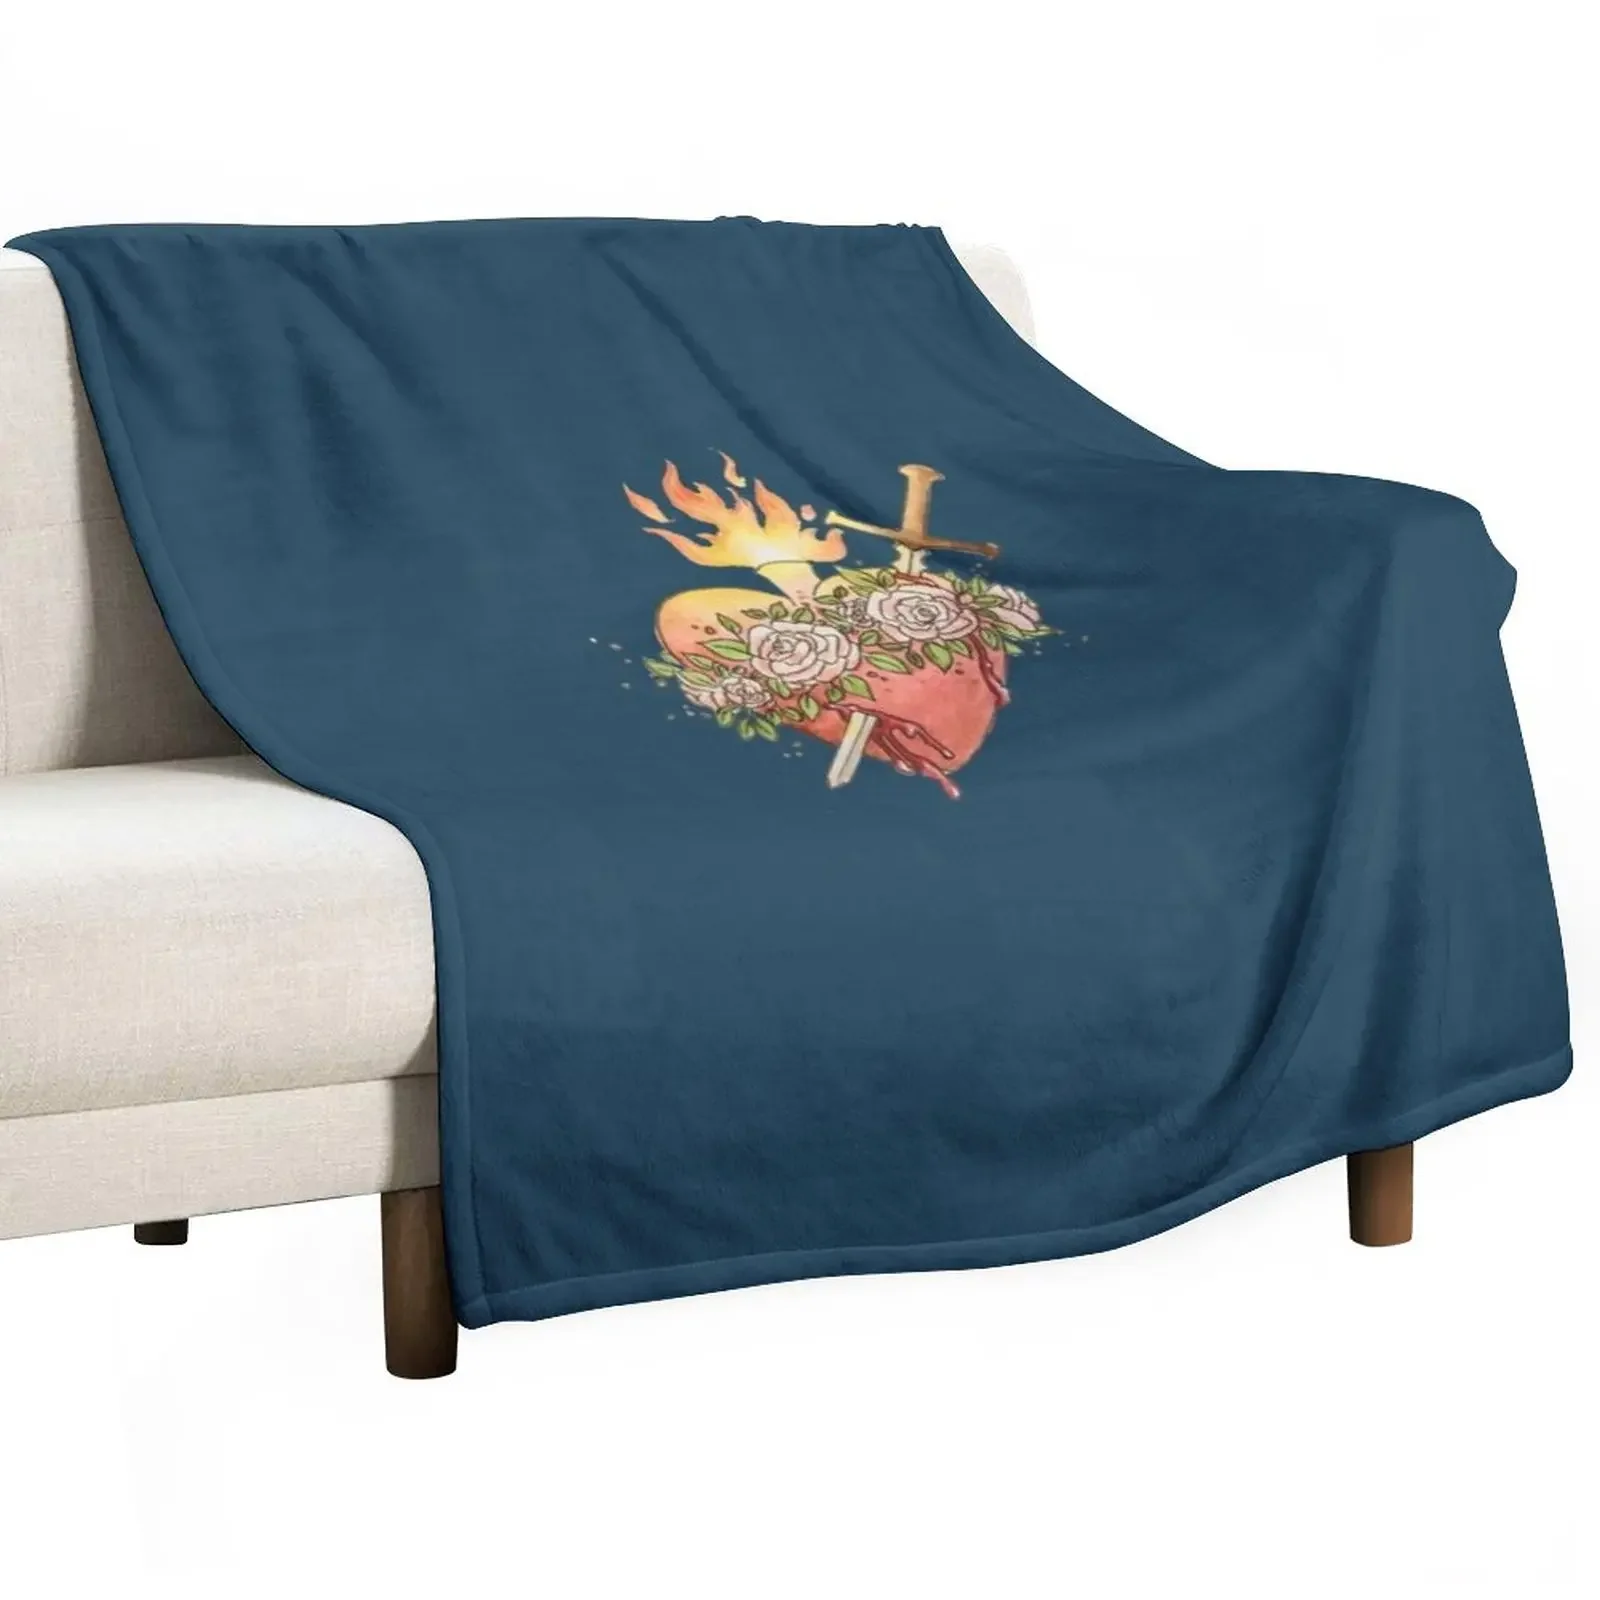 

New Immaculate Heart of Mary Throw Blanket Extra Large Throw Luxury Throw Blankets